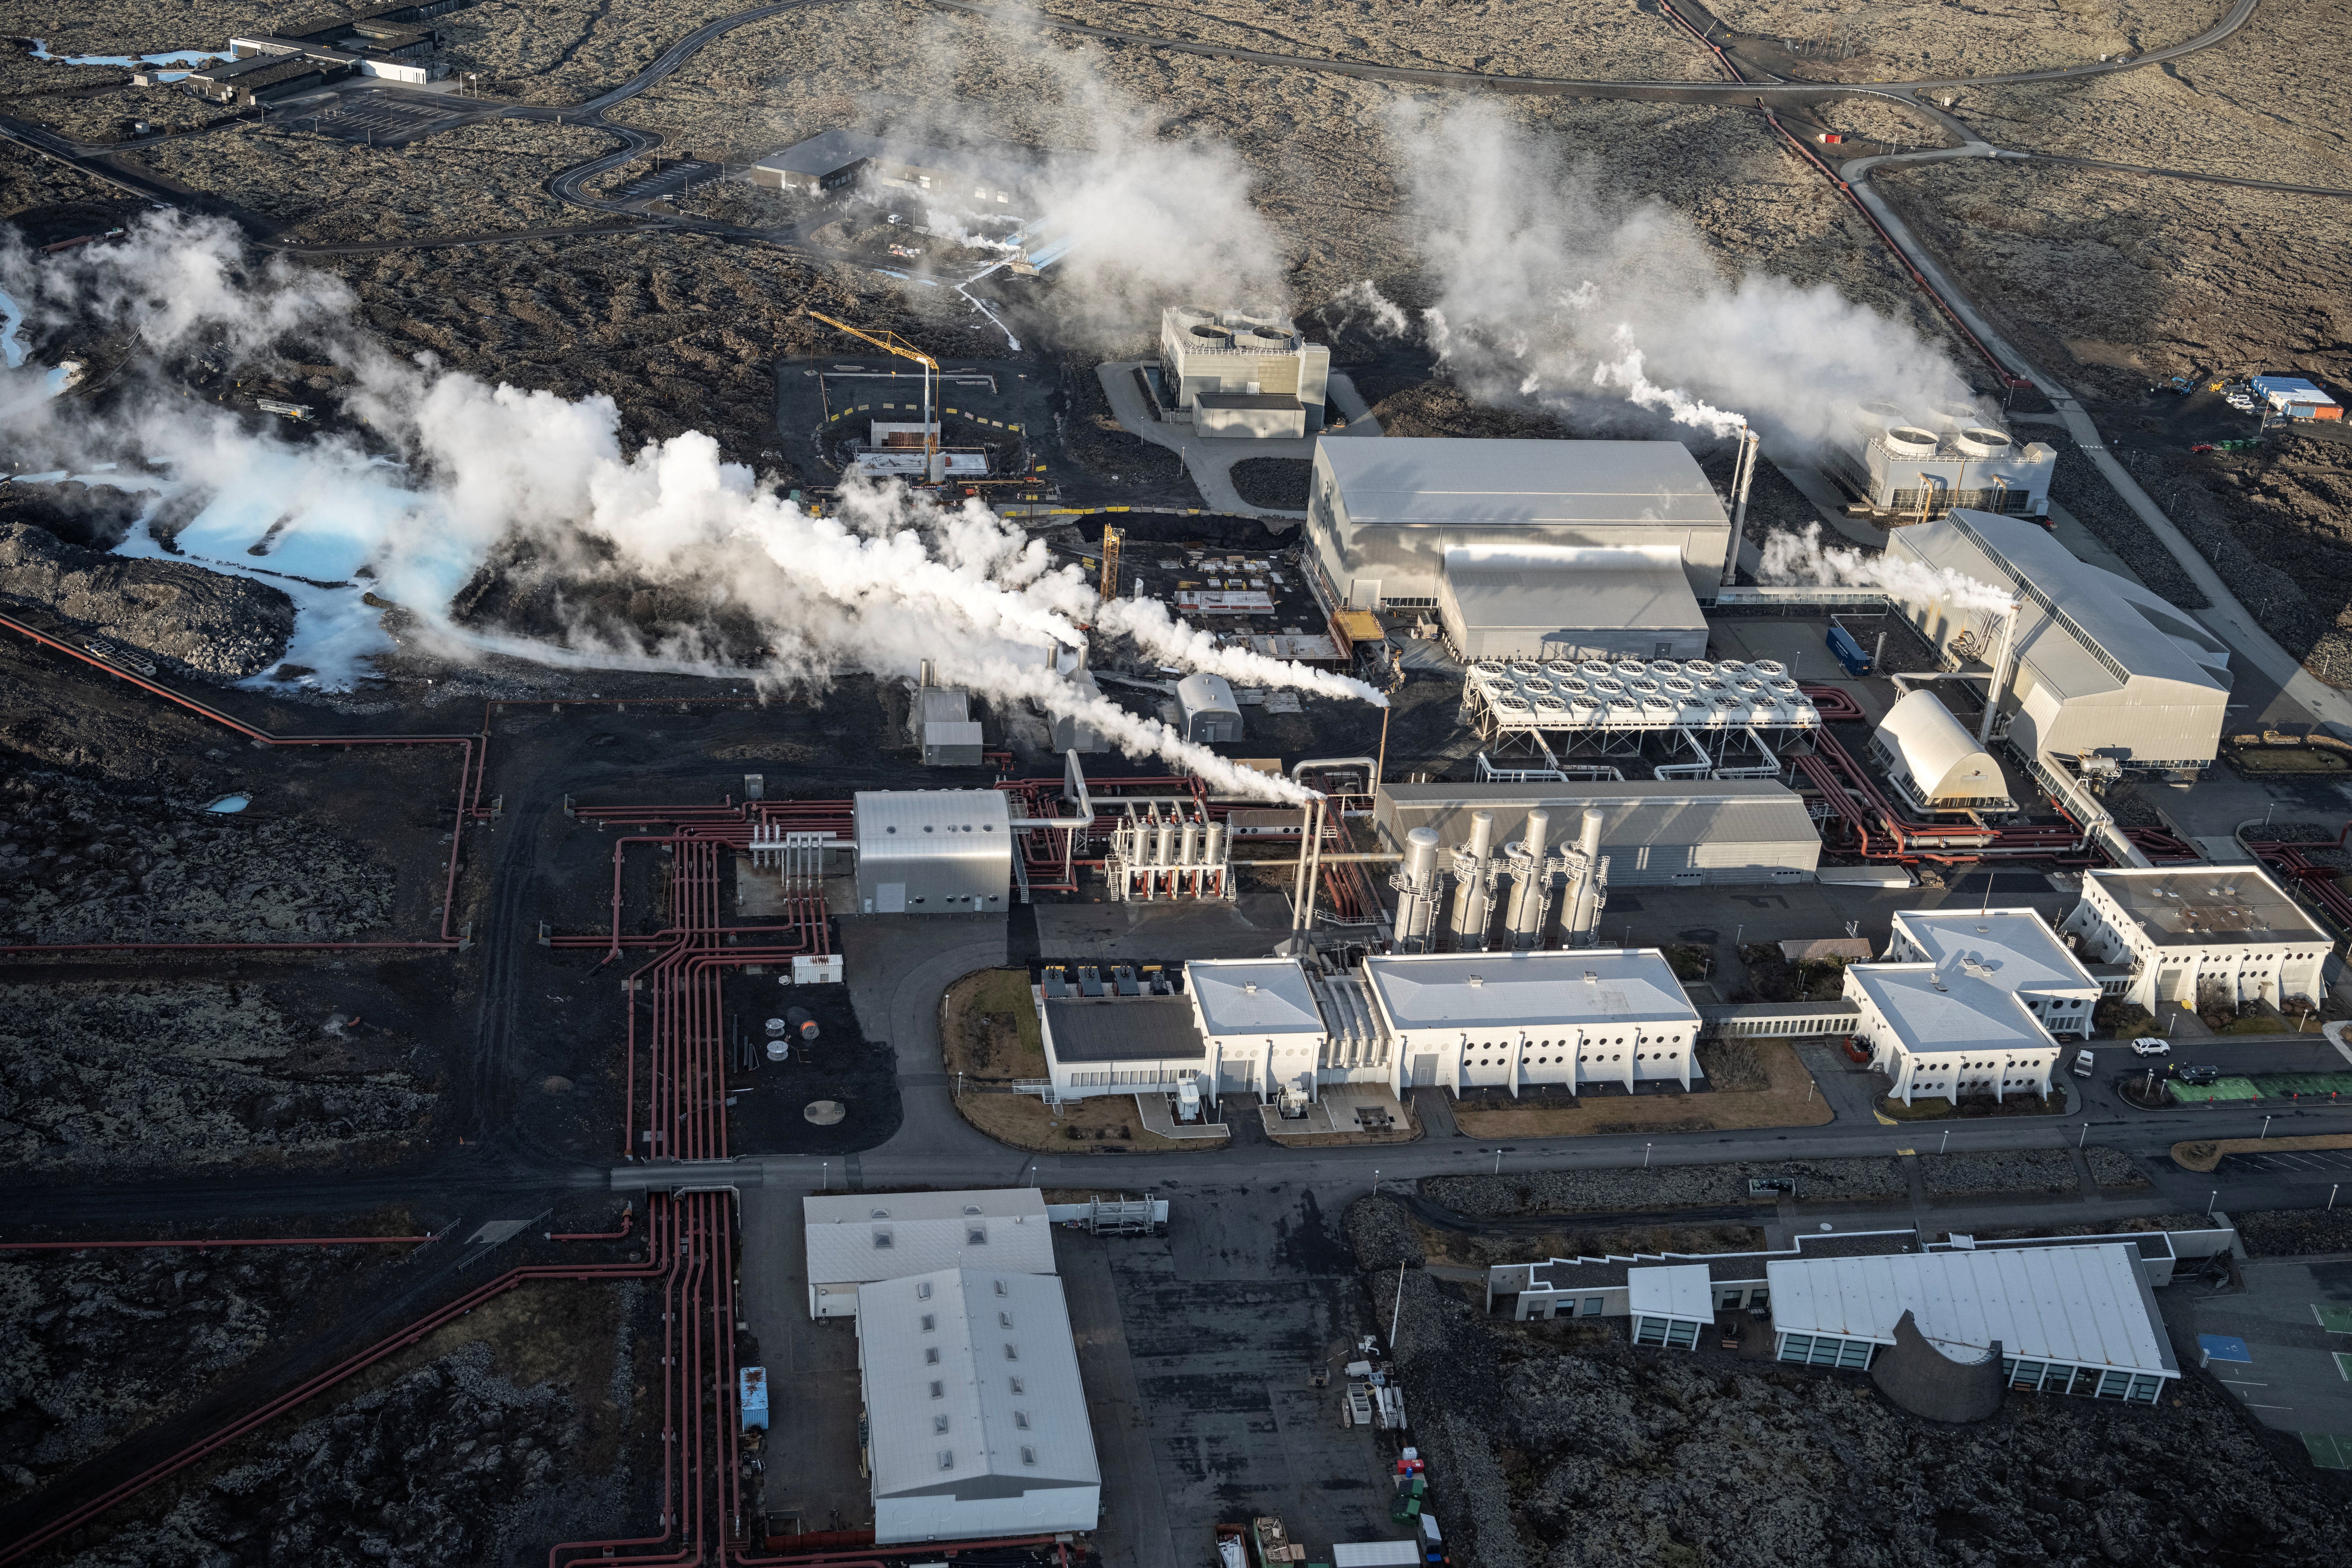 The Svartsengi geothermal power plant may be threatened by ongoing eruption nearby